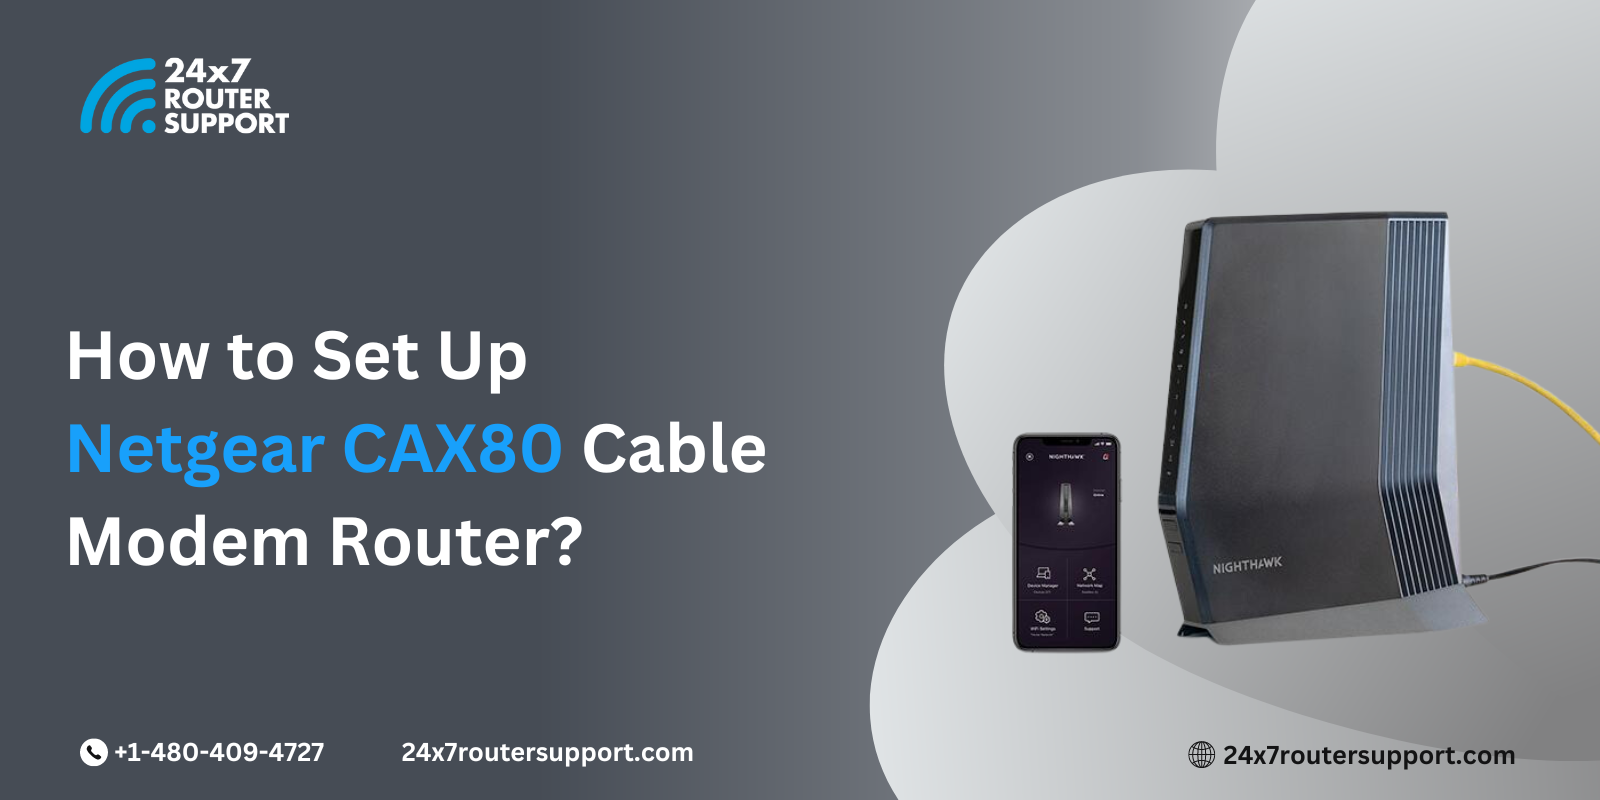 How to Set Up Netgear CAX80 Cable Modem Router?